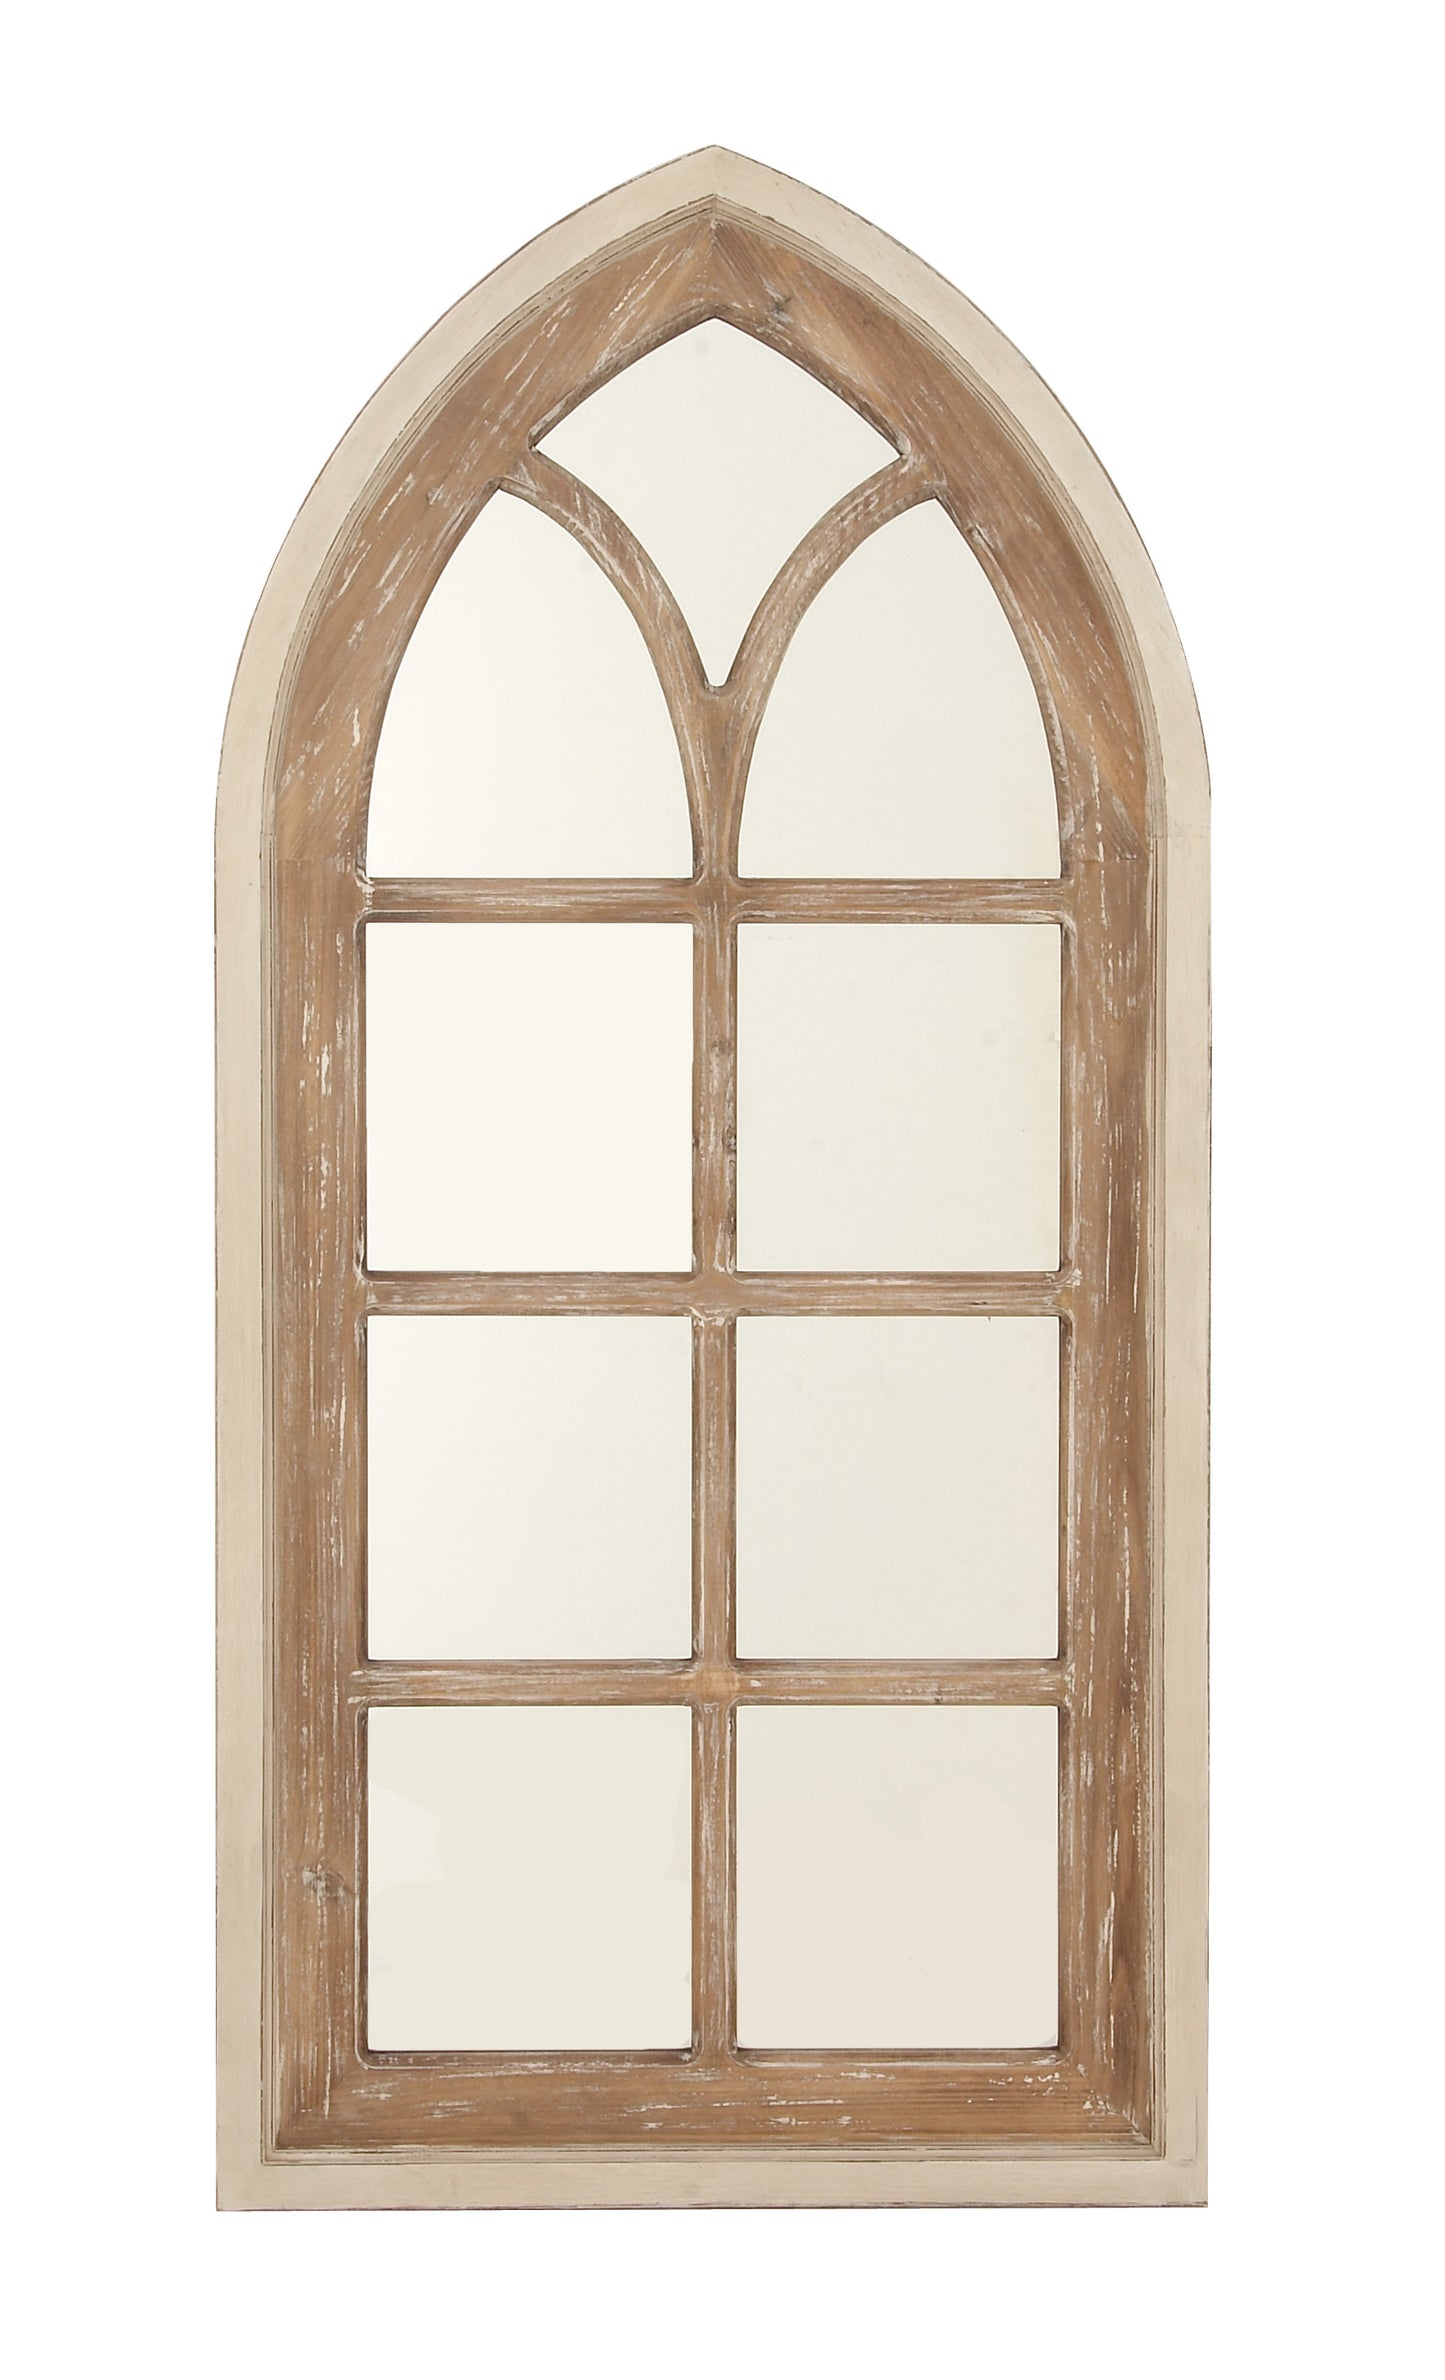 Arched Wooden Wall Mirror